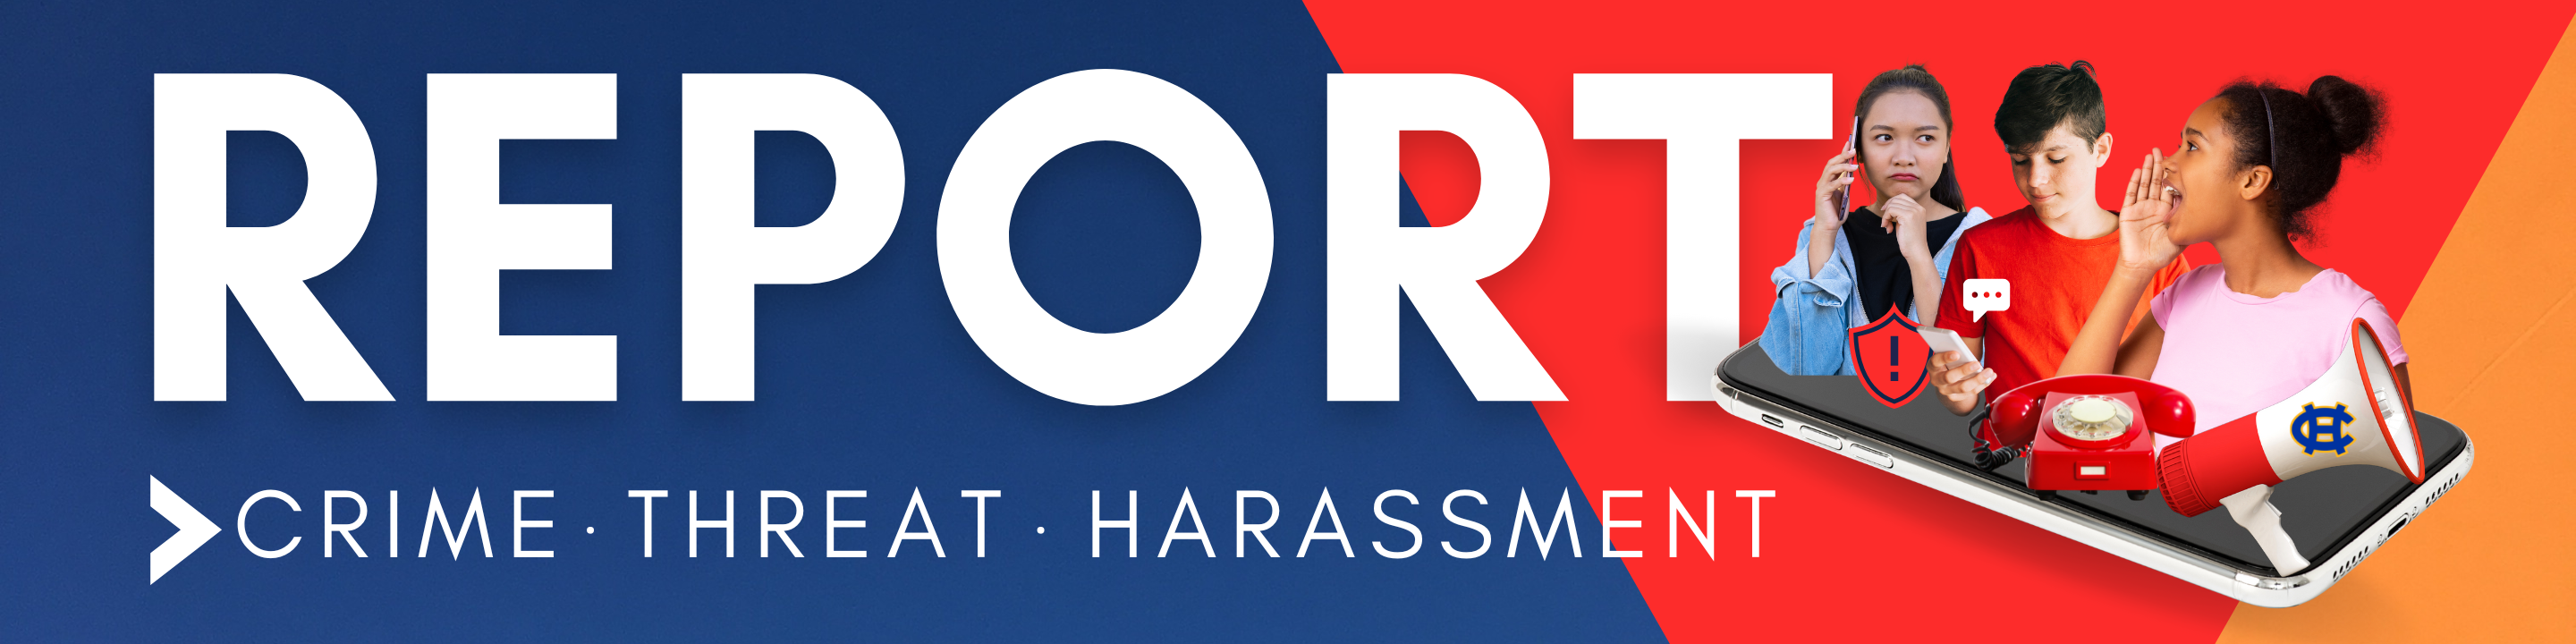 Report an Incident: Crime, Harassment, and Threat 